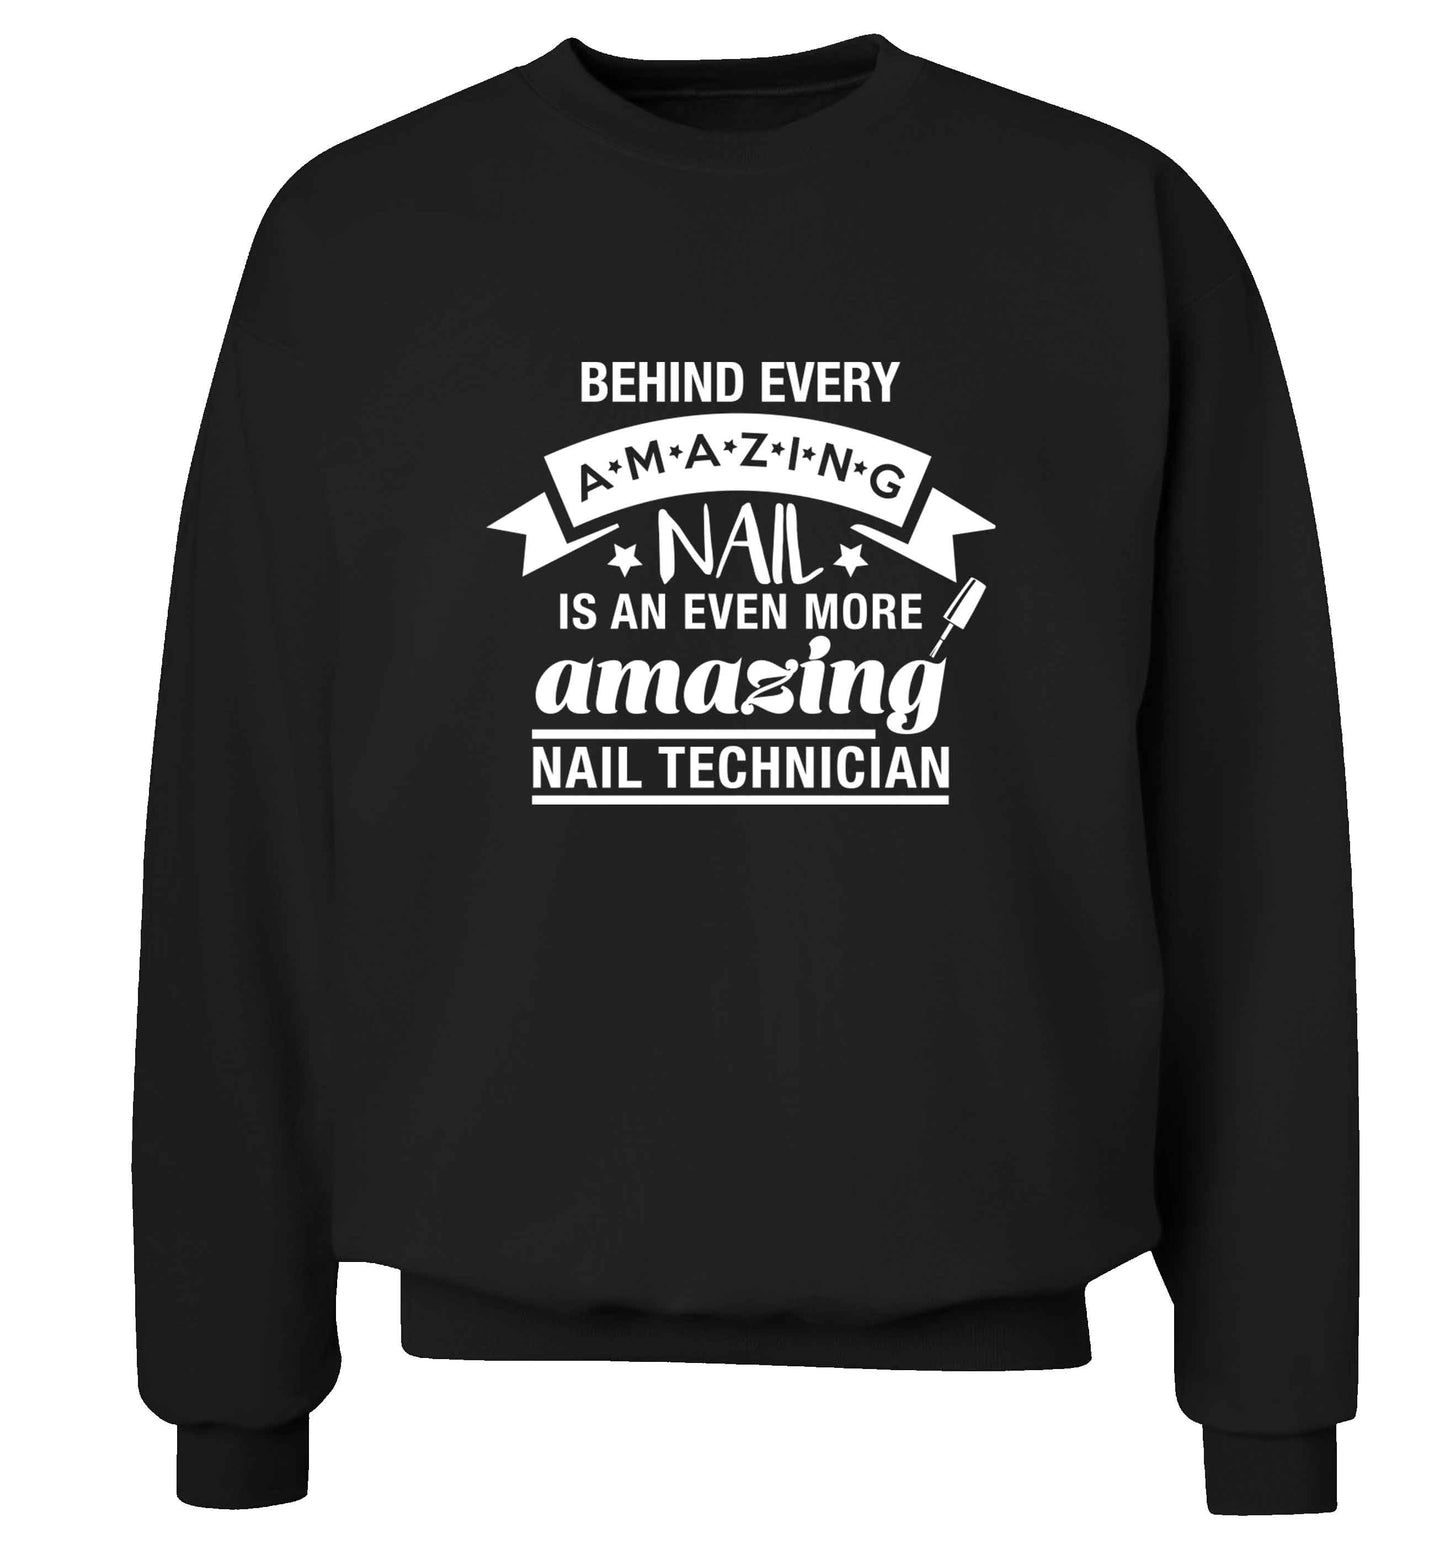 Behind every amazing nail is an even more amazing nail technician adult's unisex black sweater 2XL